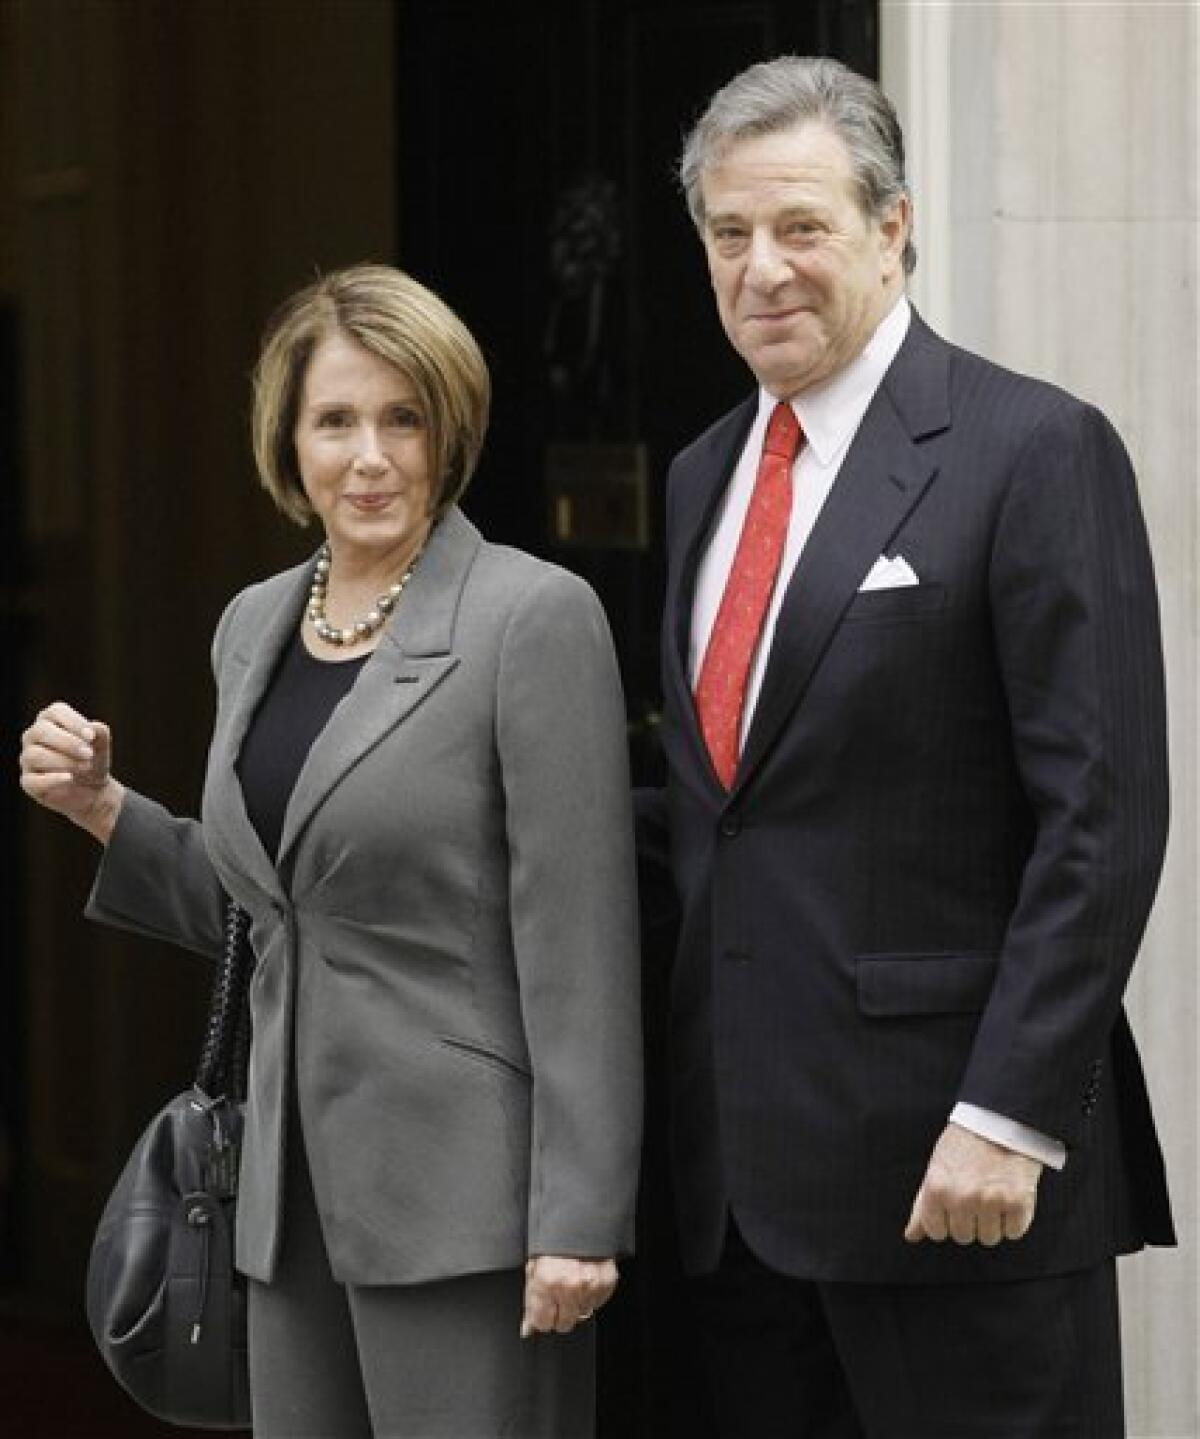 Speaker of the U.S. House of Representatives Nancy Pelosi and her husband Paul arrive at 10 Downing Street in London, to meet Britain's Prime Minister Gordon Brown, Tuesday May 12, 2009. (AP Photo/Matt Dunham)